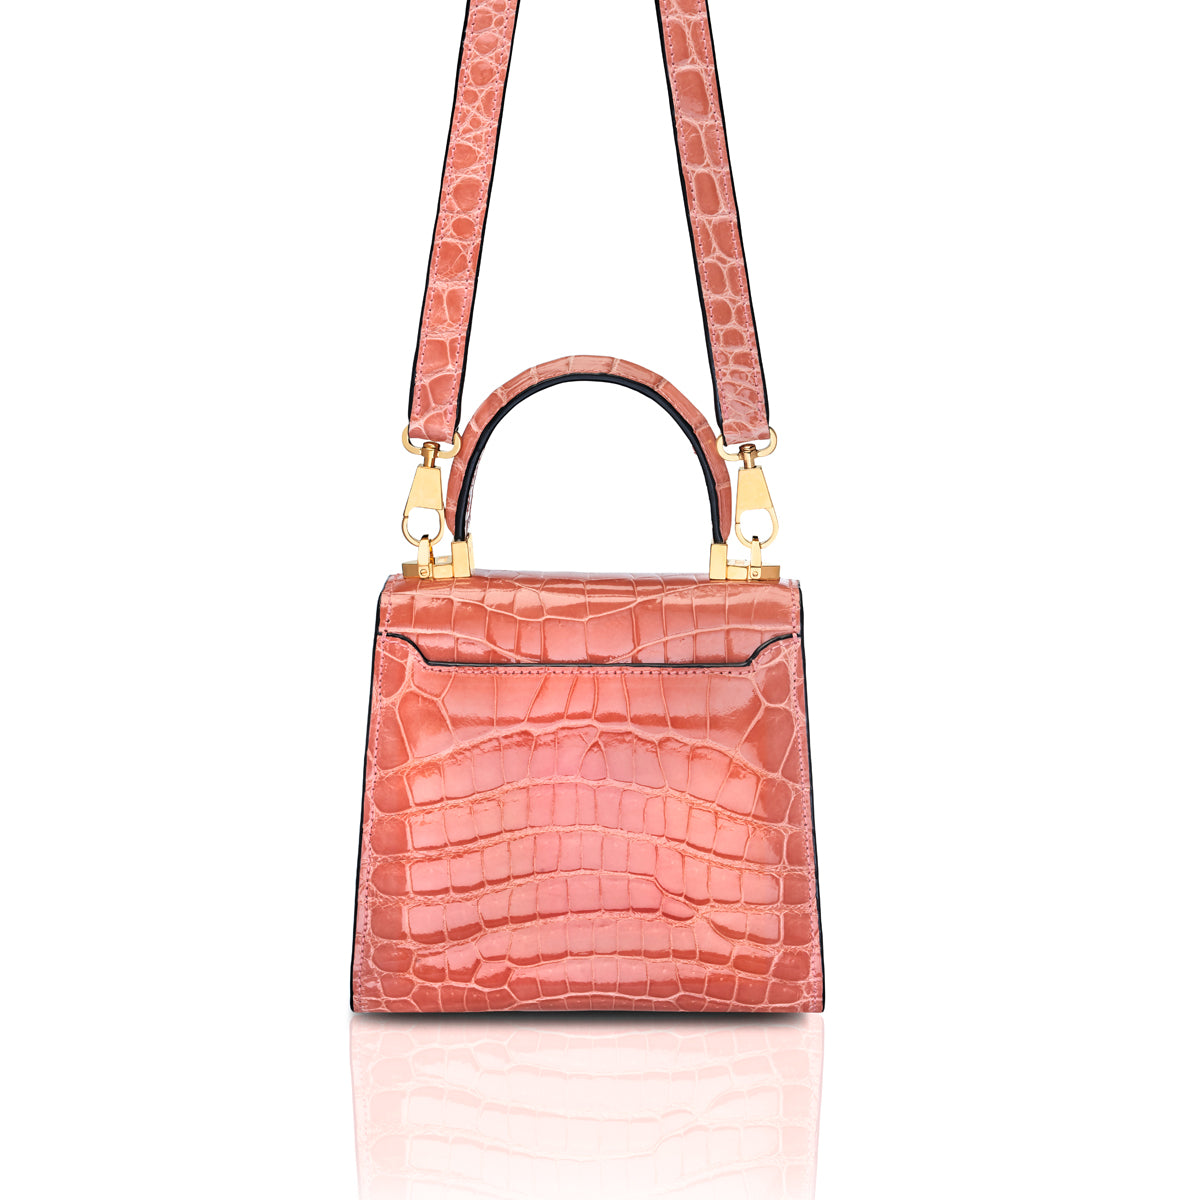 STALVEY Trapezoid 1.55 Mini in Coral Alligator with 24kt Gold Hardware Front View